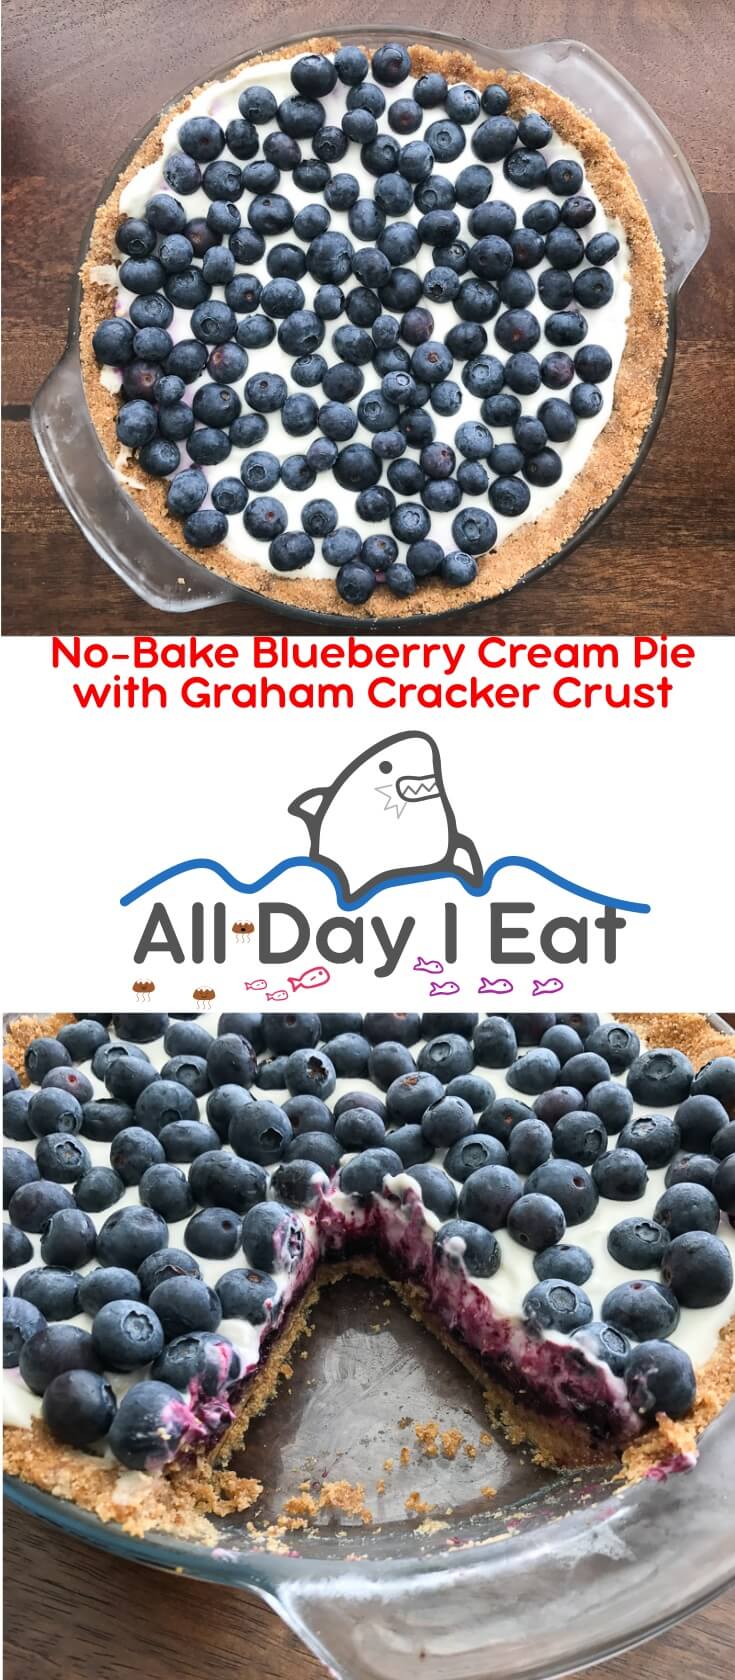 No Bake Blueberry Cream Pie with Graham Cracker Crust is a taste of summer you won't forget. Best served chilled, this pie filling is rich, creamy, and fruity with just the right amount of sweetness. The graham cracker crust is classic and one you can repurpose for other no bake desserts like my other favorite, cheesecake!